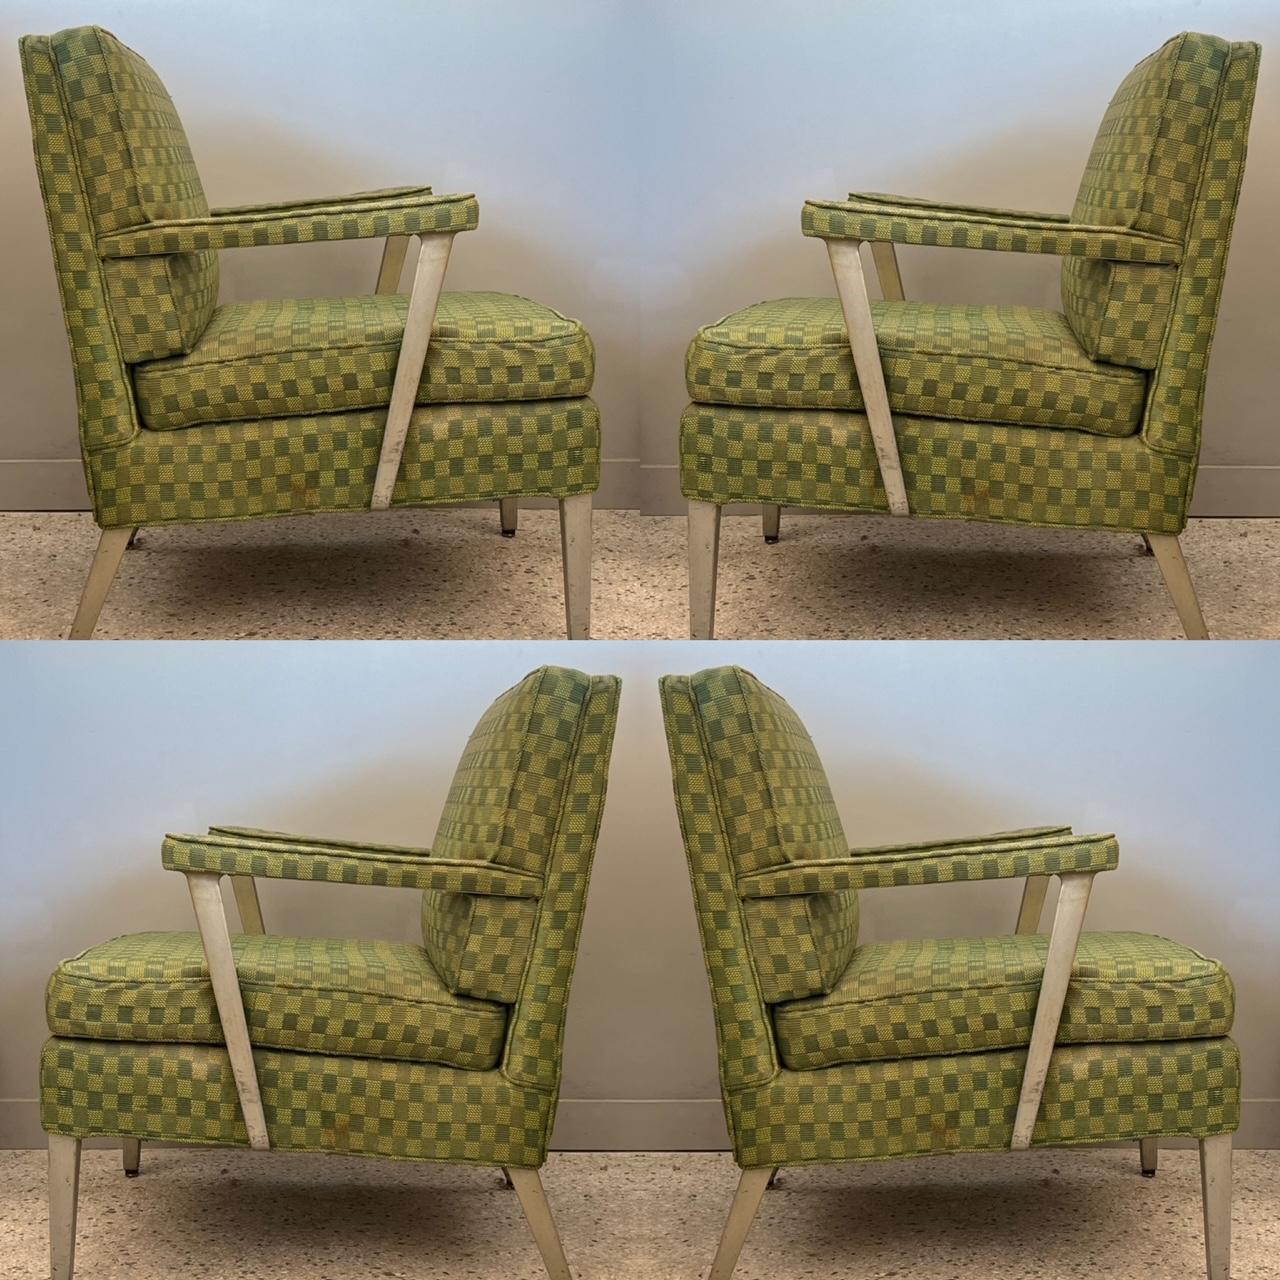 Pair of SS United States First Class Cabin Upholstered Arm Chairs In Good Condition For Sale In St.Petersburg, FL